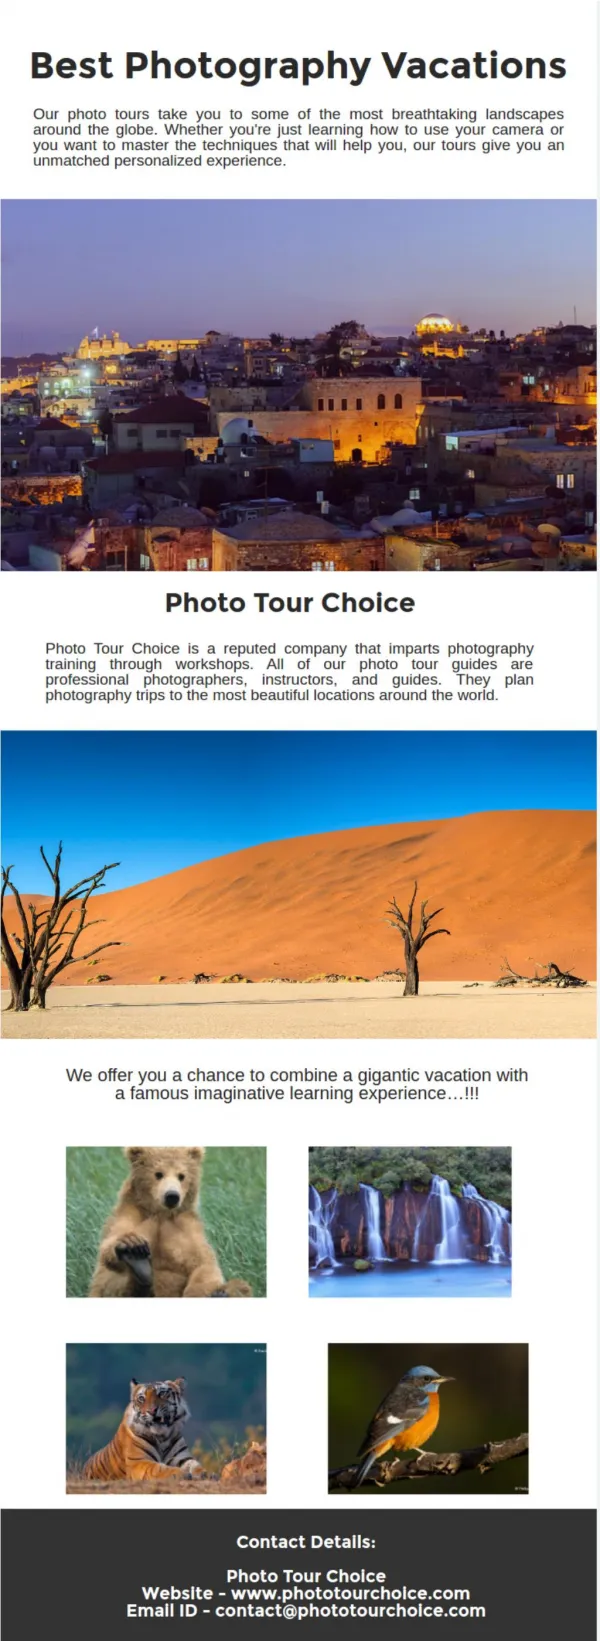 Best Photography Vacations